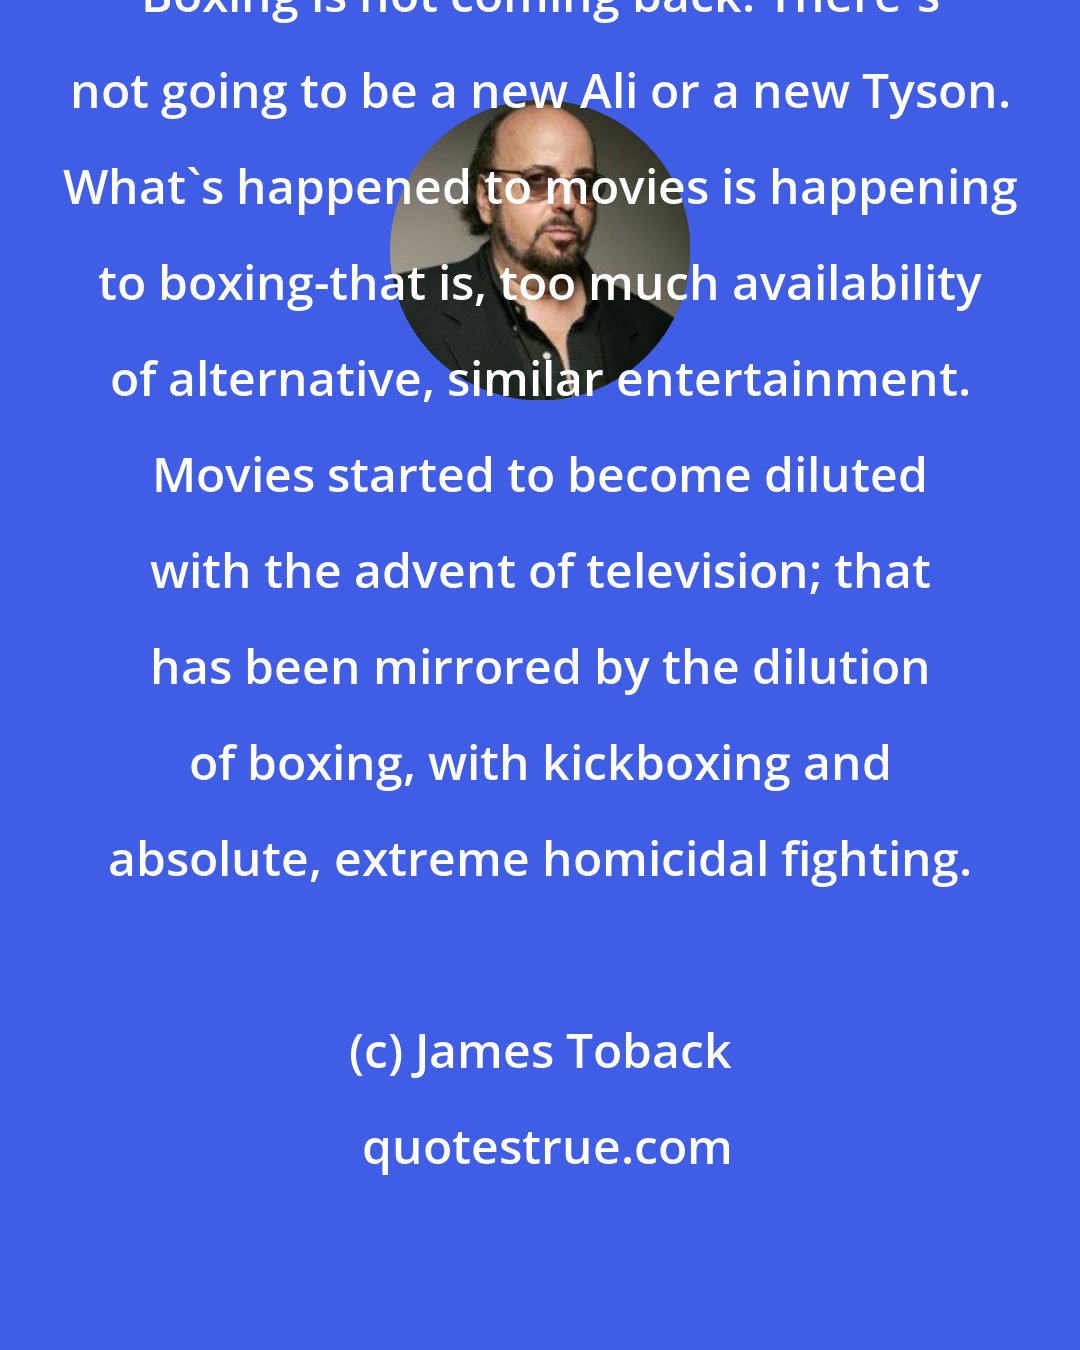 James Toback: Boxing is not coming back. There's not going to be a new Ali or a new Tyson. What's happened to movies is happening to boxing-that is, too much availability of alternative, similar entertainment. Movies started to become diluted with the advent of television; that has been mirrored by the dilution of boxing, with kickboxing and absolute, extreme homicidal fighting.